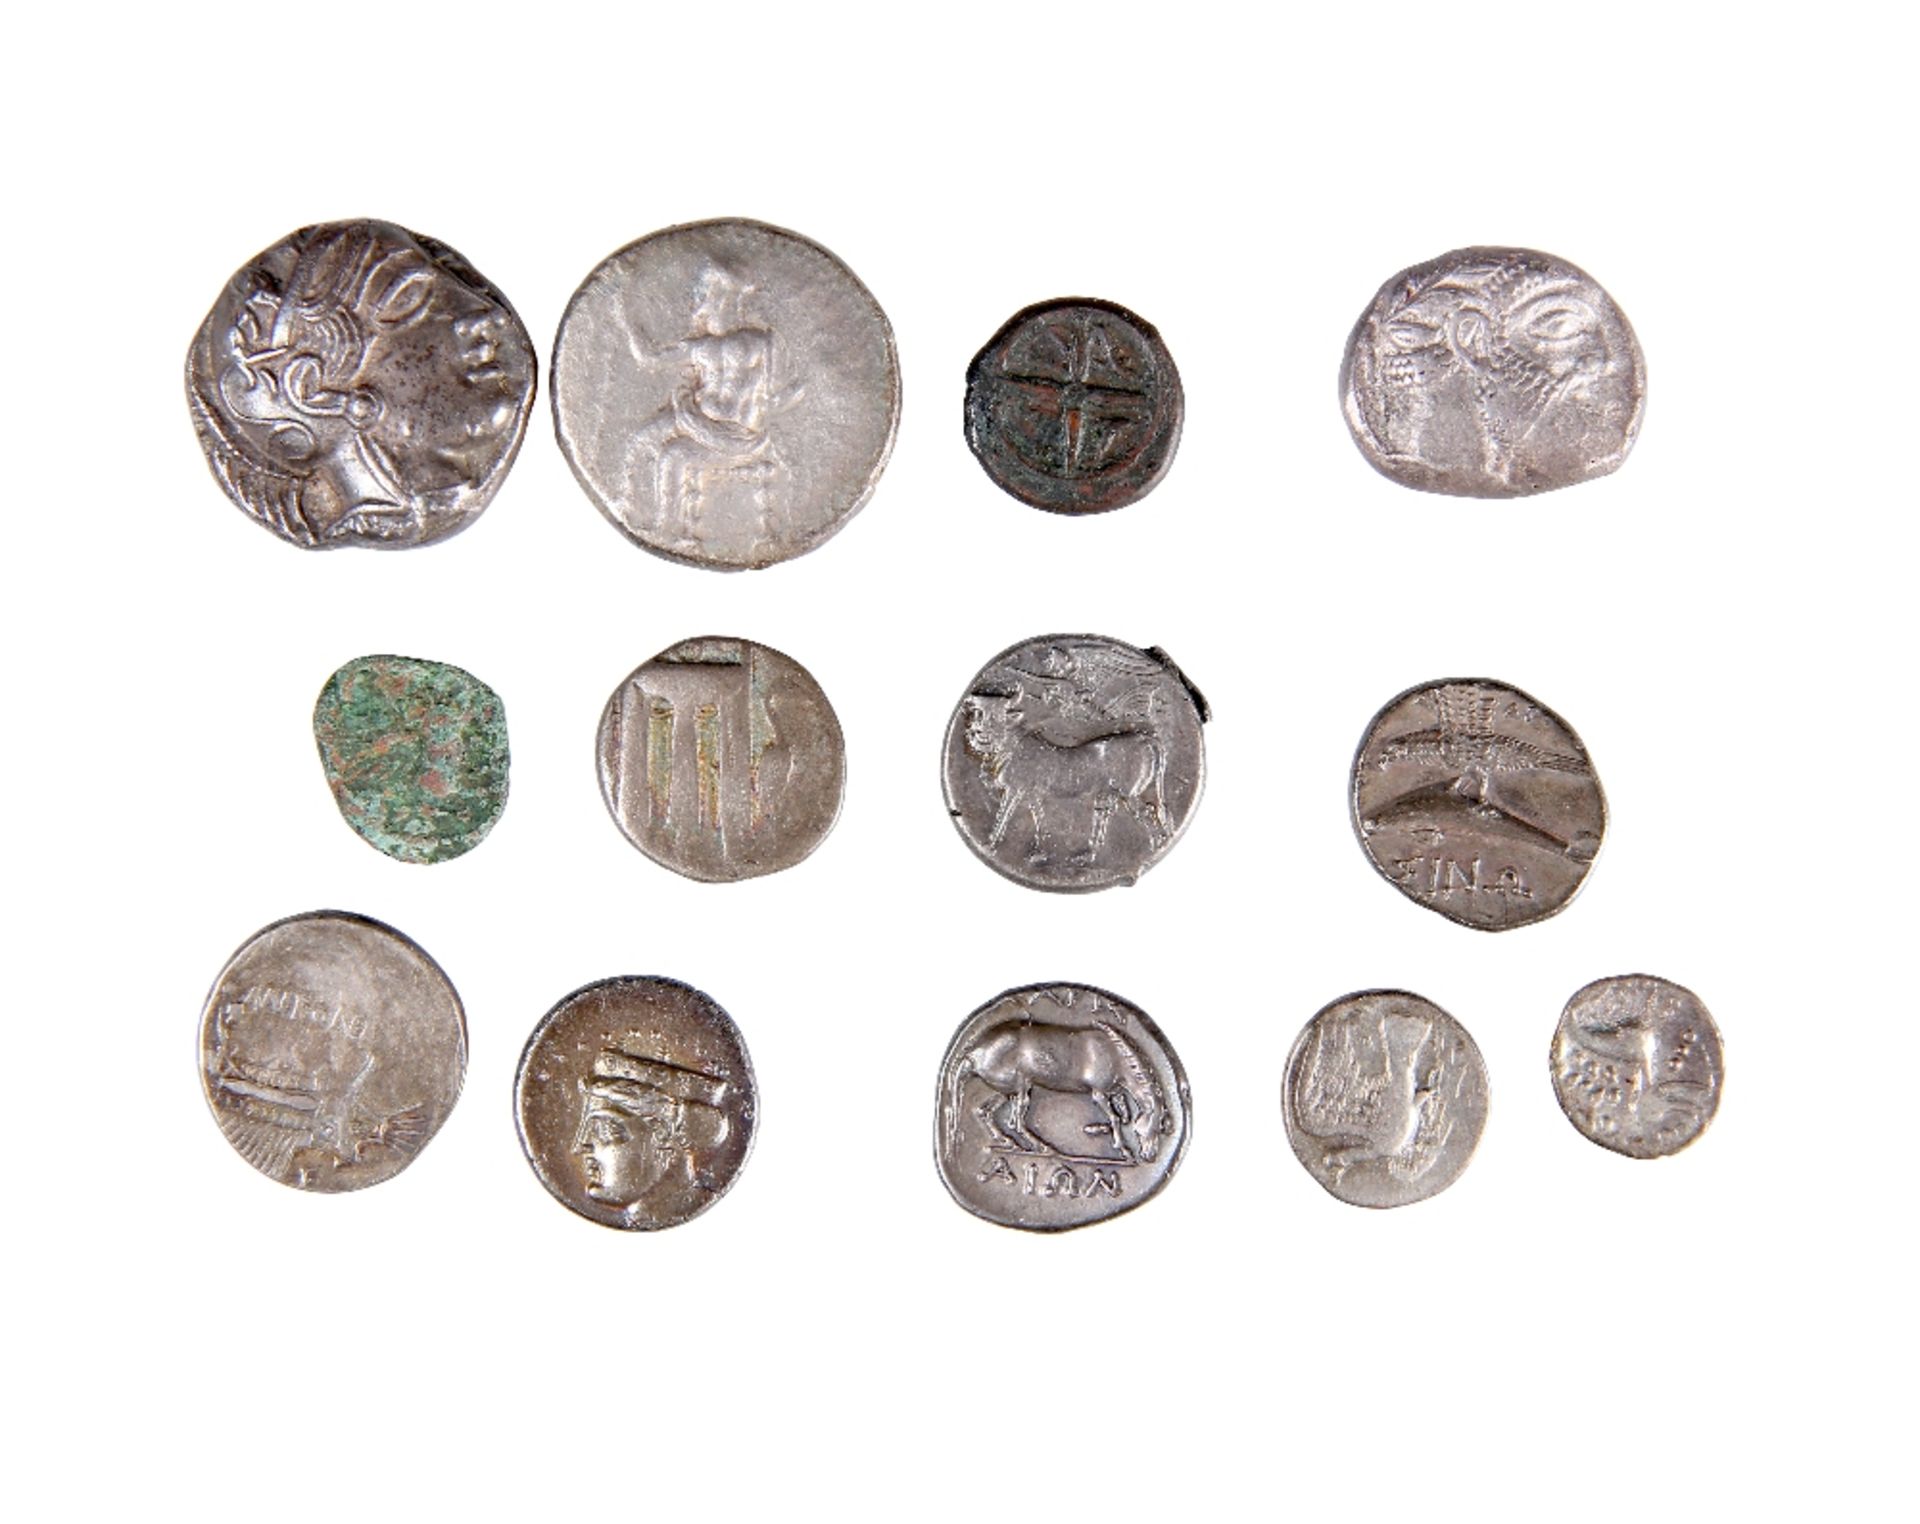 A SMALL COLLECTION OF THIRTEEN ANCIENT GREEK COINS